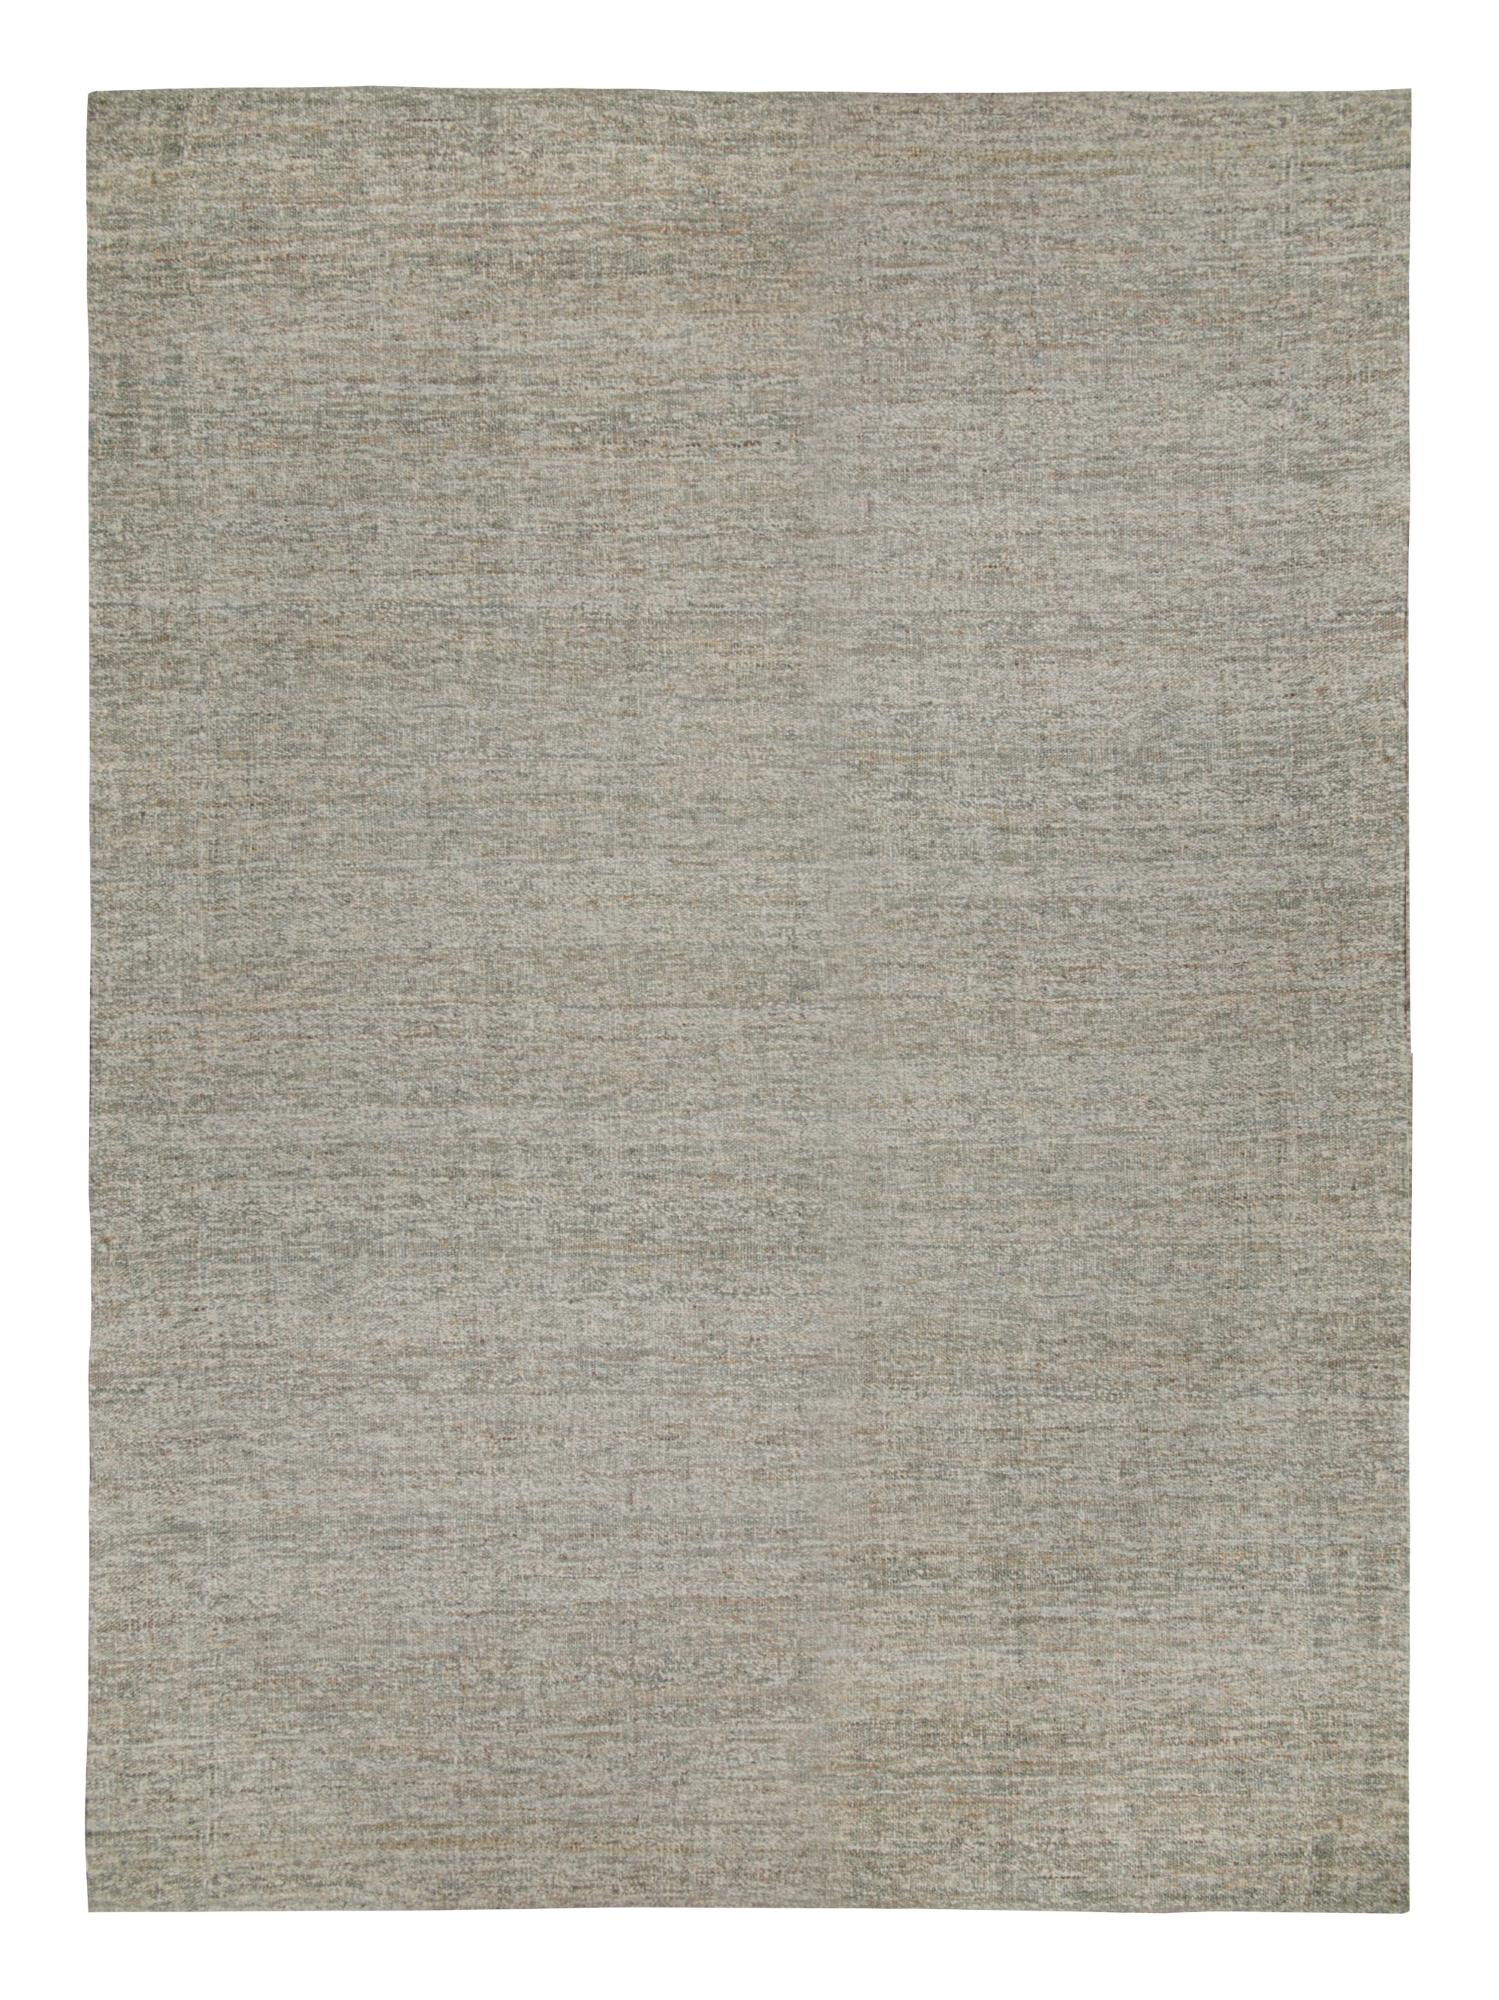 Hand-Knotted Rug & Kilim’s Contemporary Jute Kilim in Tones of Gray For Sale